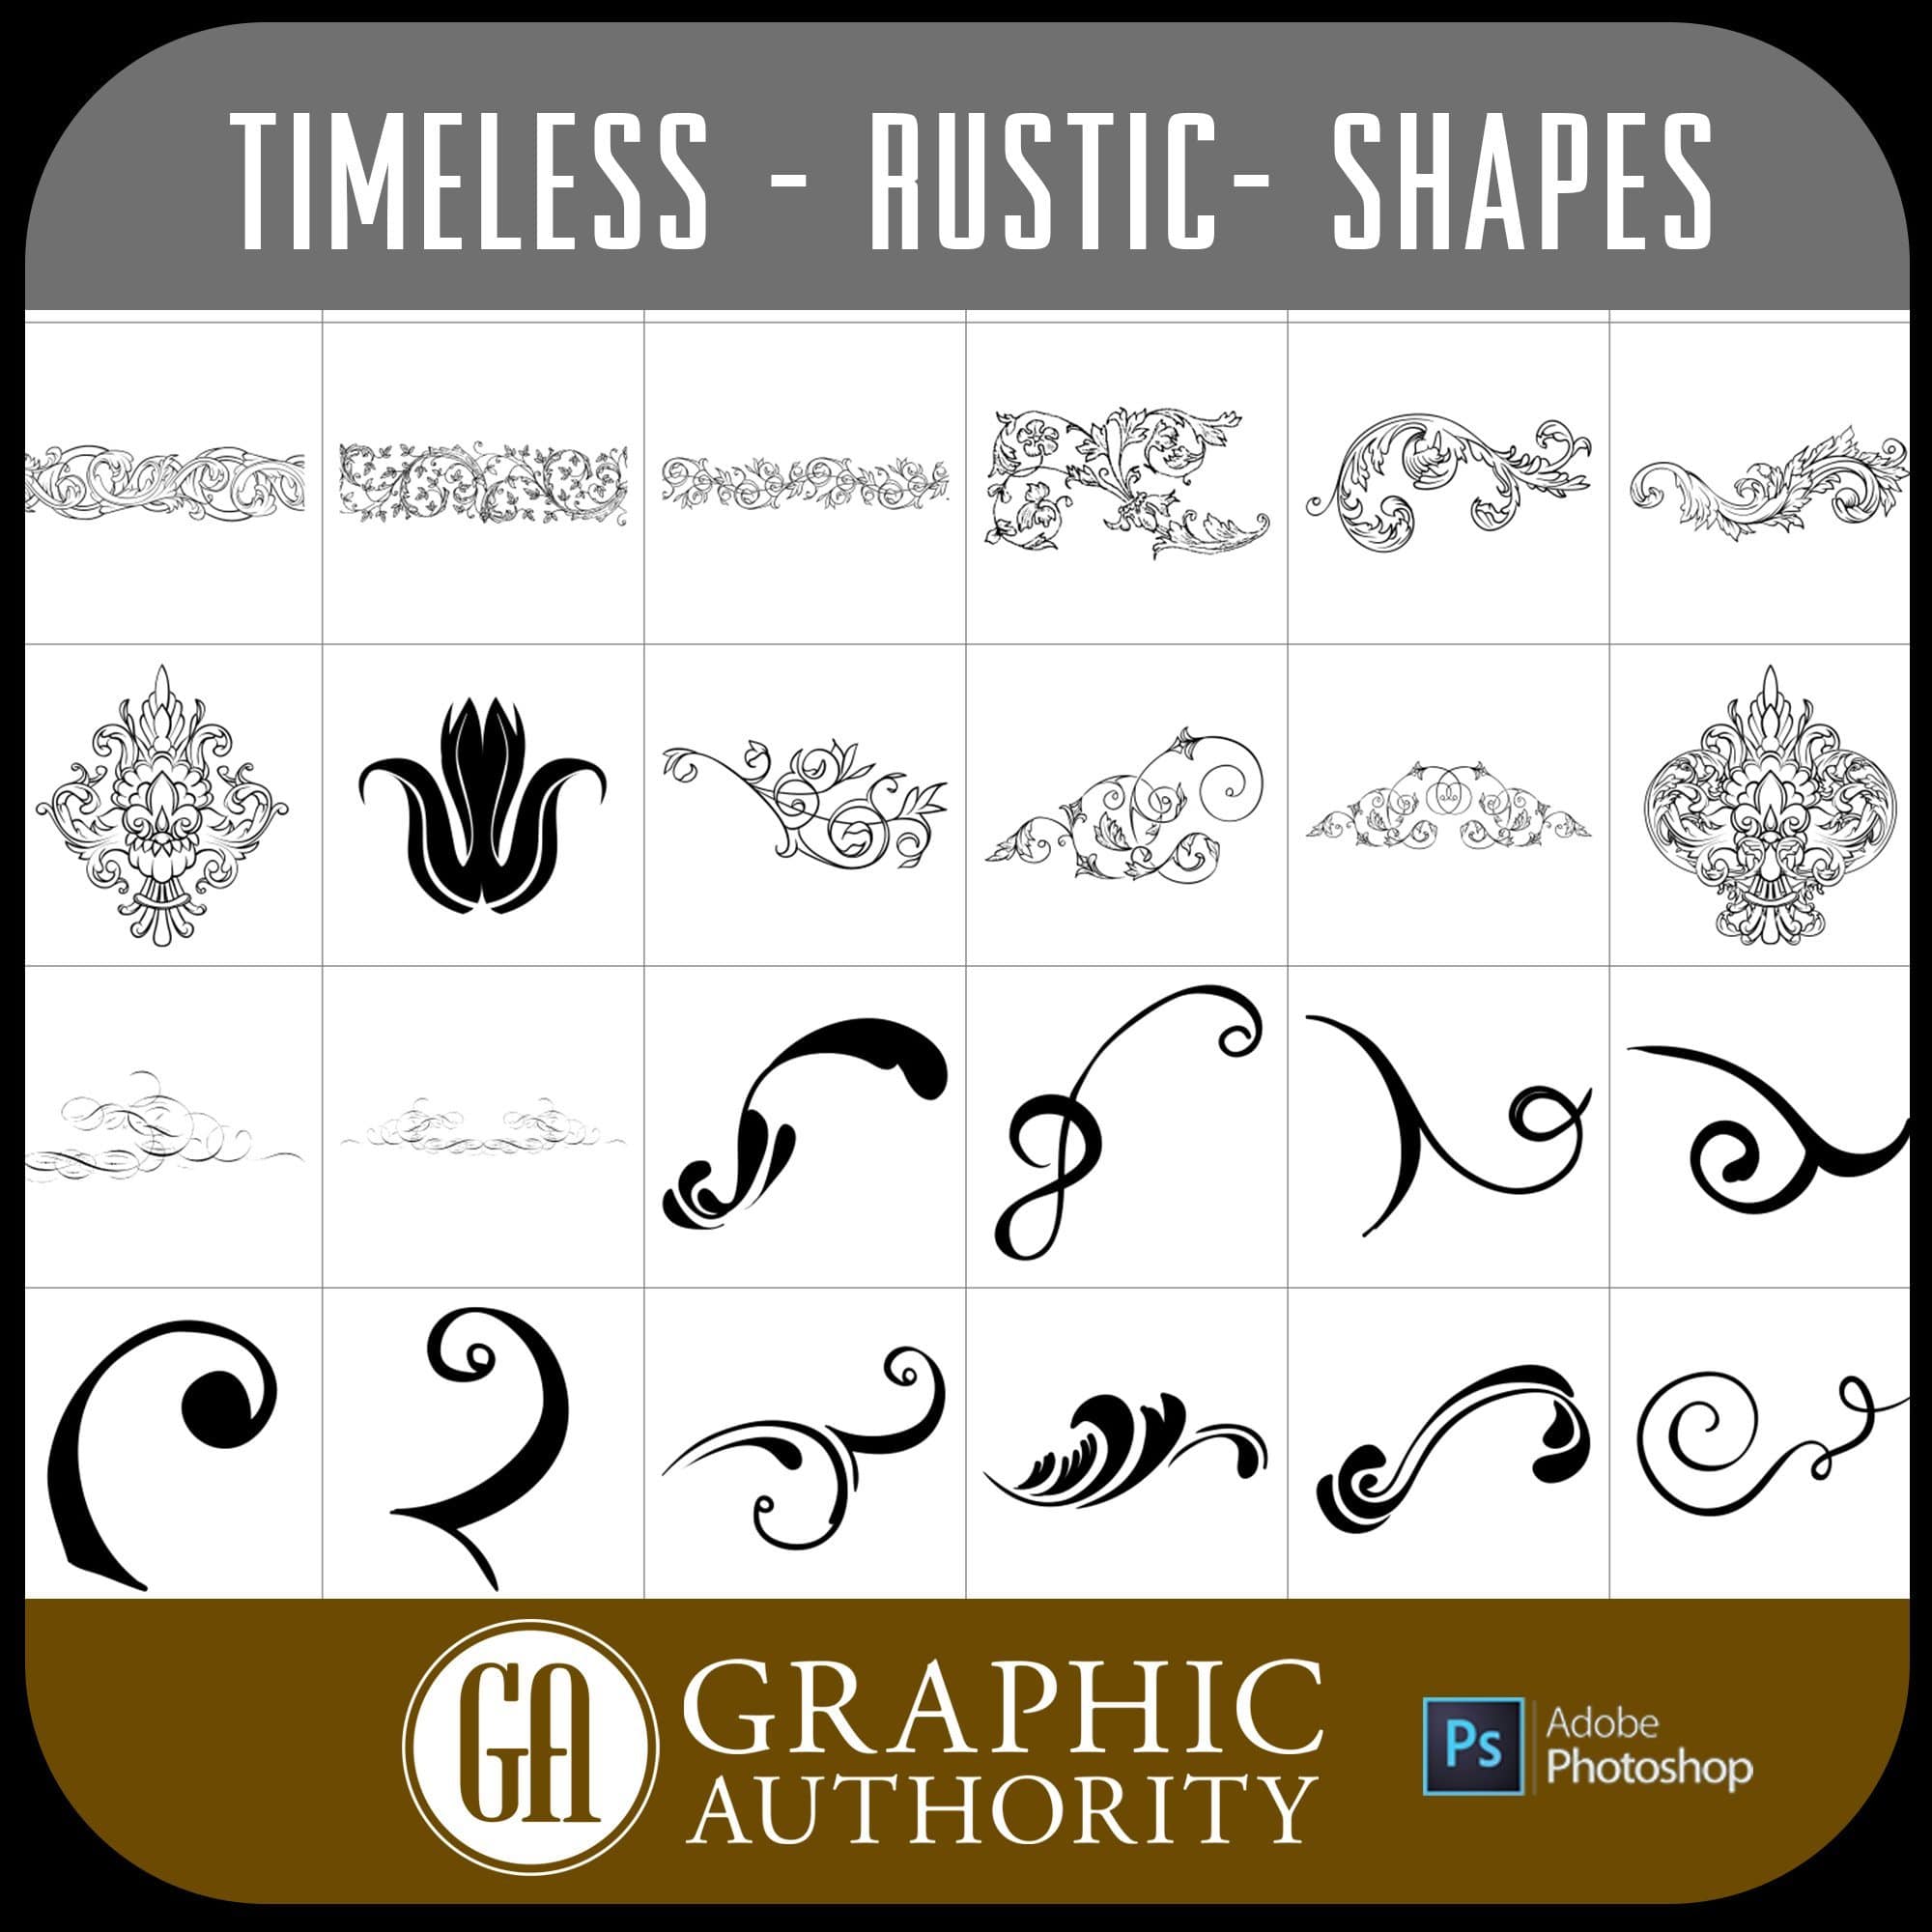 Timeless Rustic - Vector .CHS Photoshop Shapes-Photoshop Template - Graphic Authority